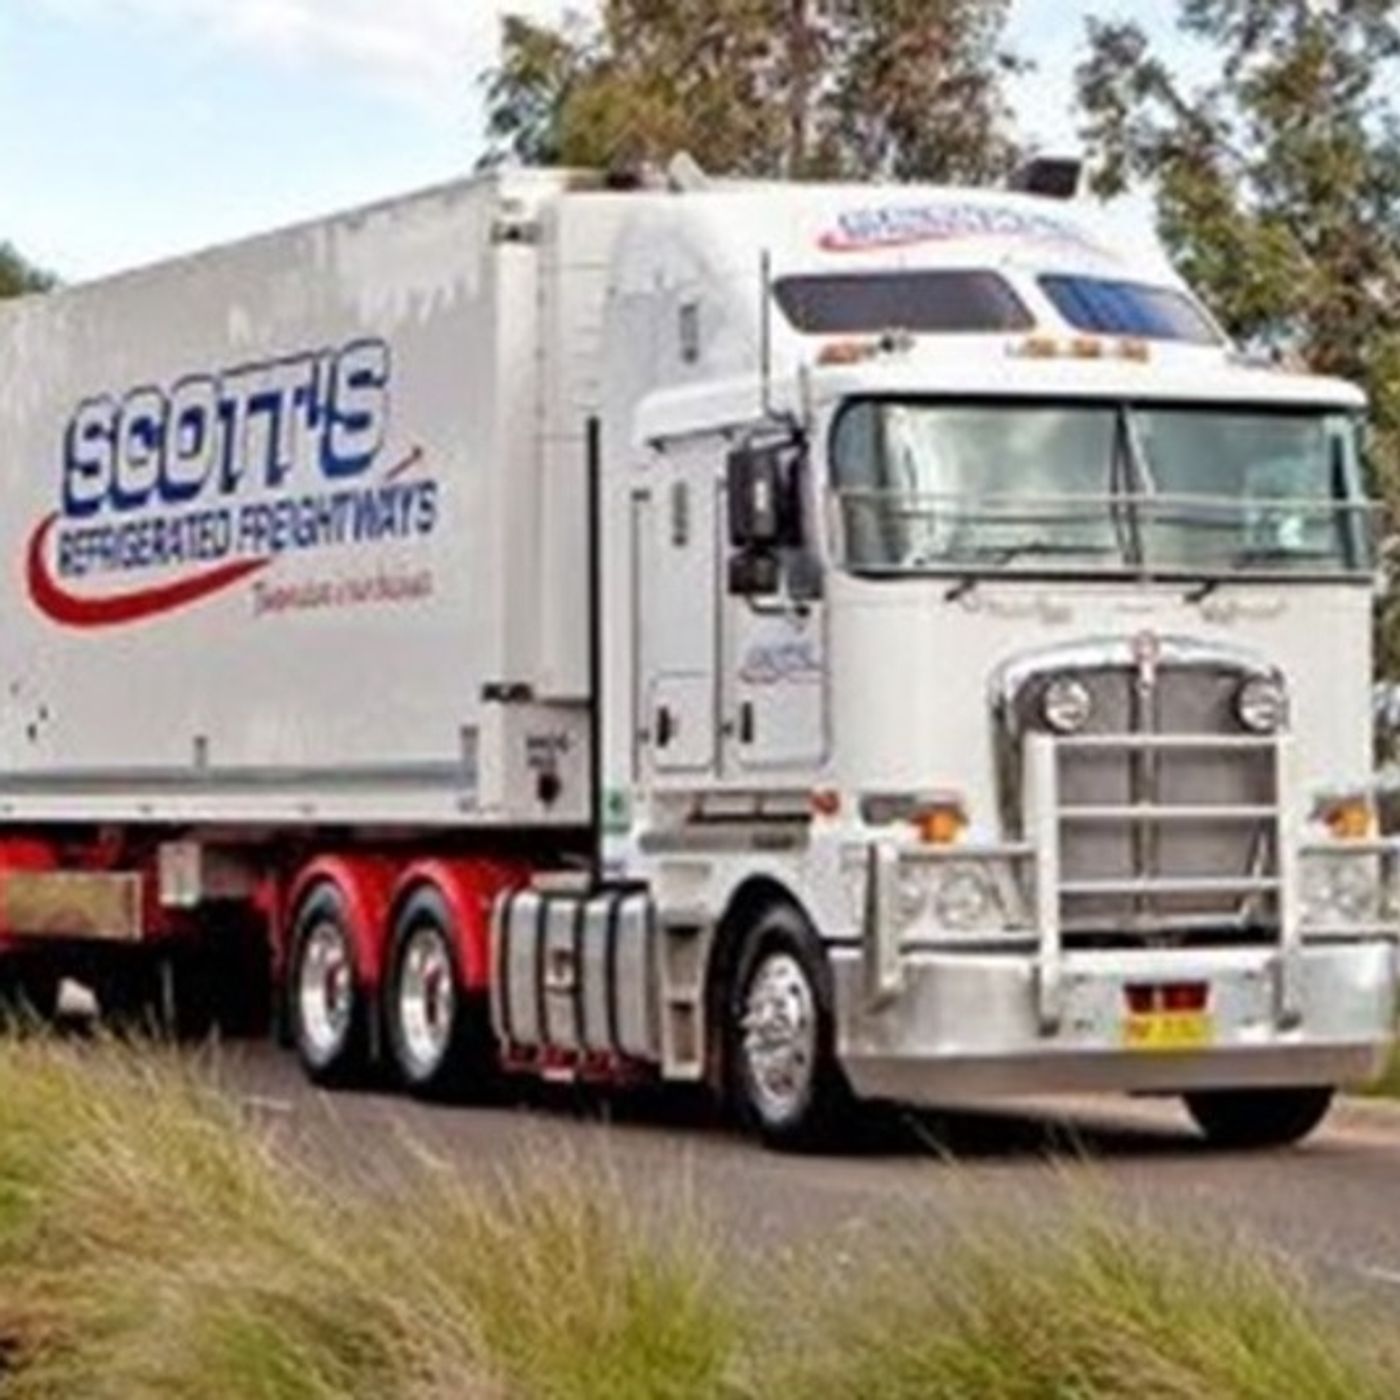 Dan Crouch talks to Dr. Elizabeth Jackson about the collapse of Scott's Refrigerated Transport